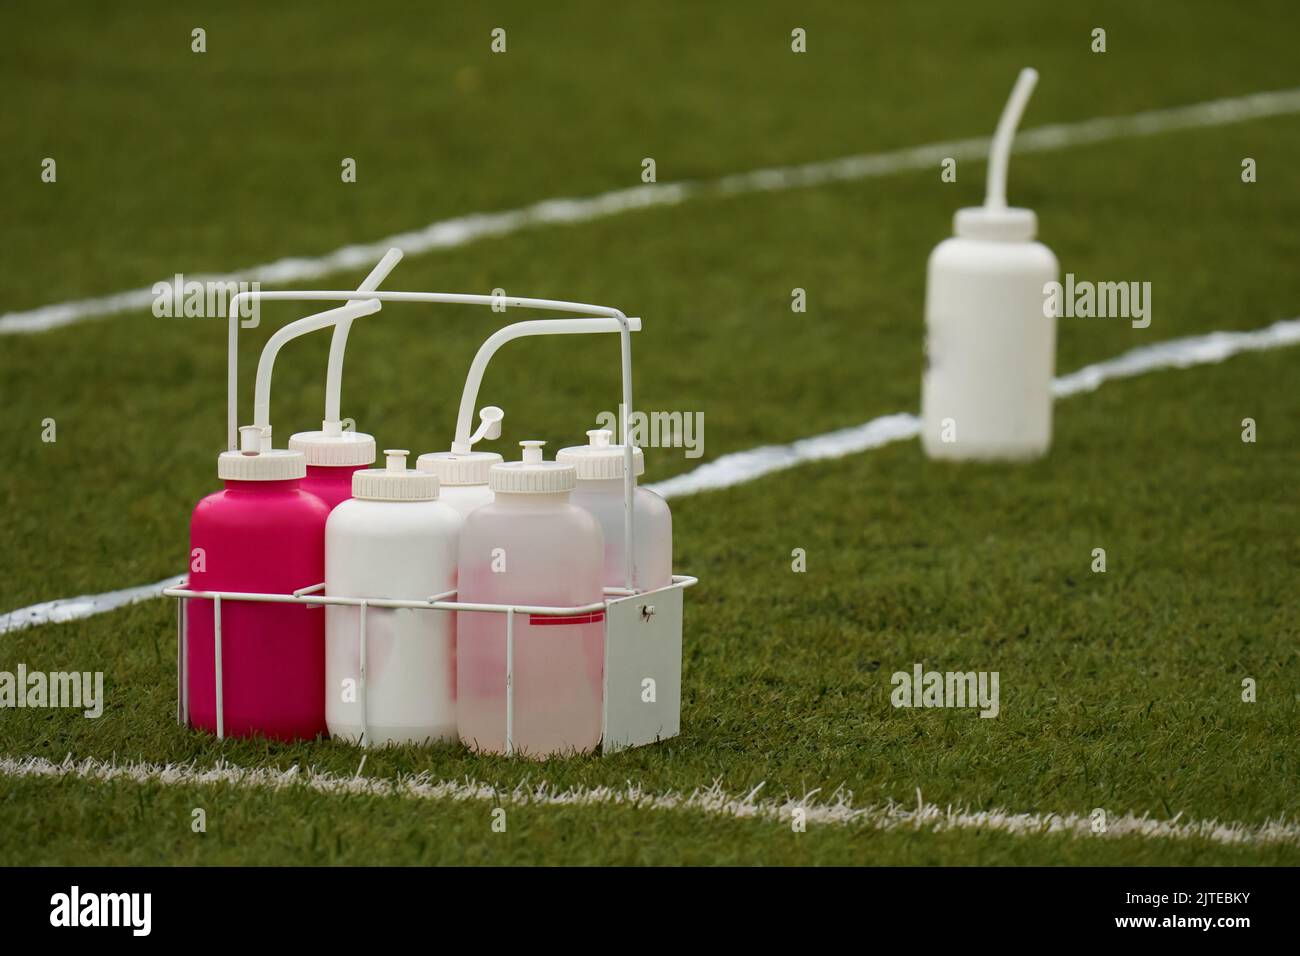 Water bottles for american football players on green grass at the edge of the playing field. Team sport concept Stock Photo